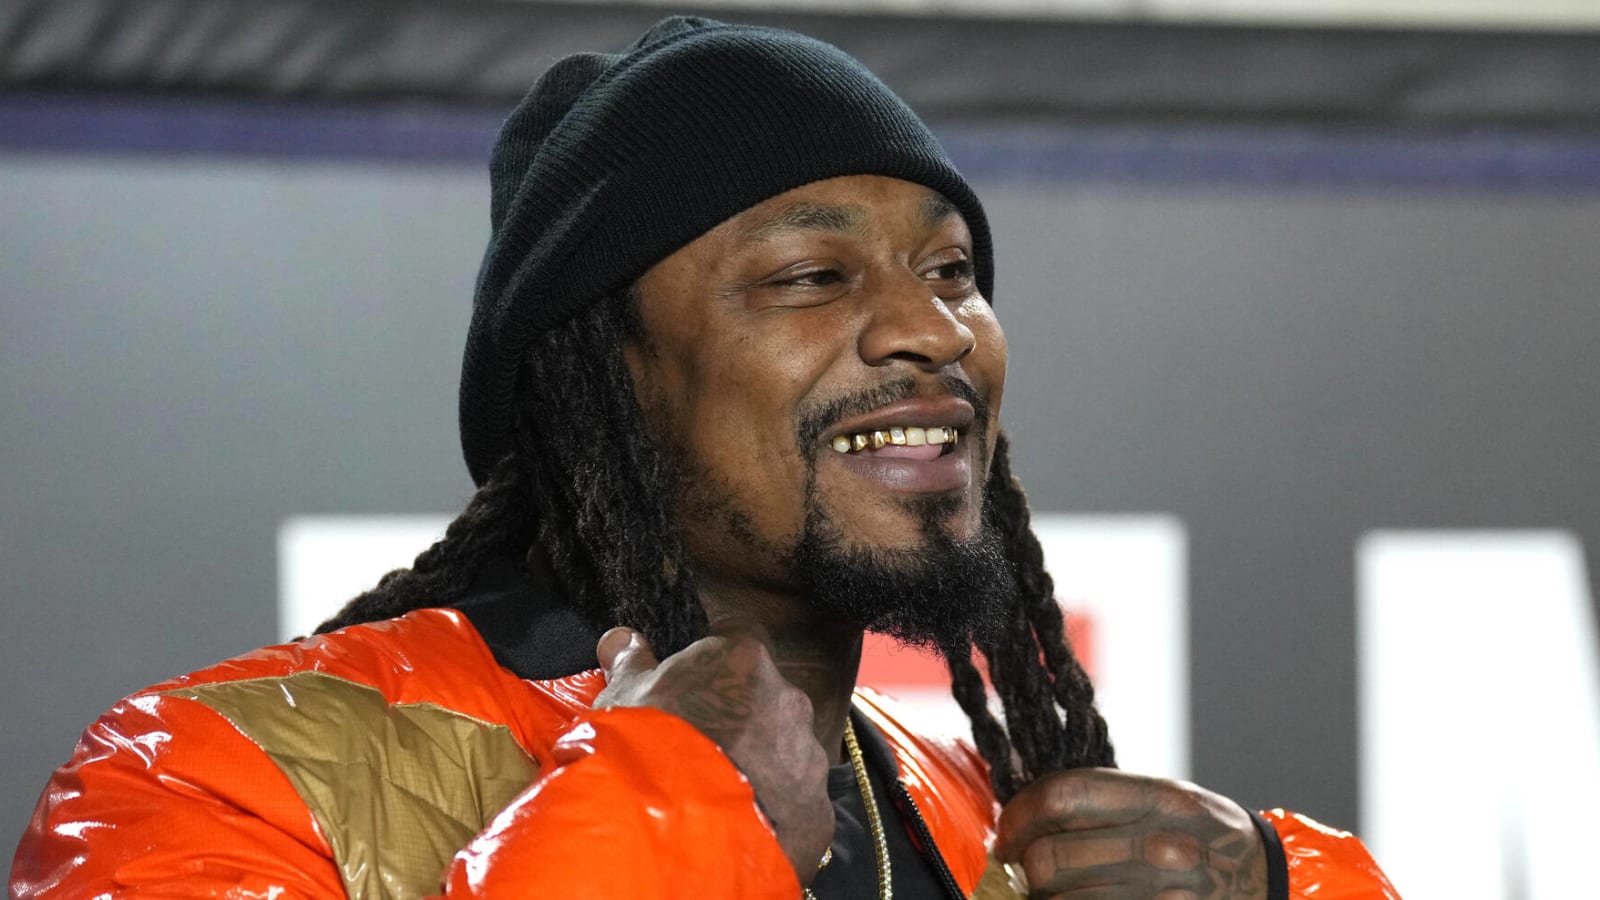 Watch: Marshawn Lynch hands out turkeys in middle of the street